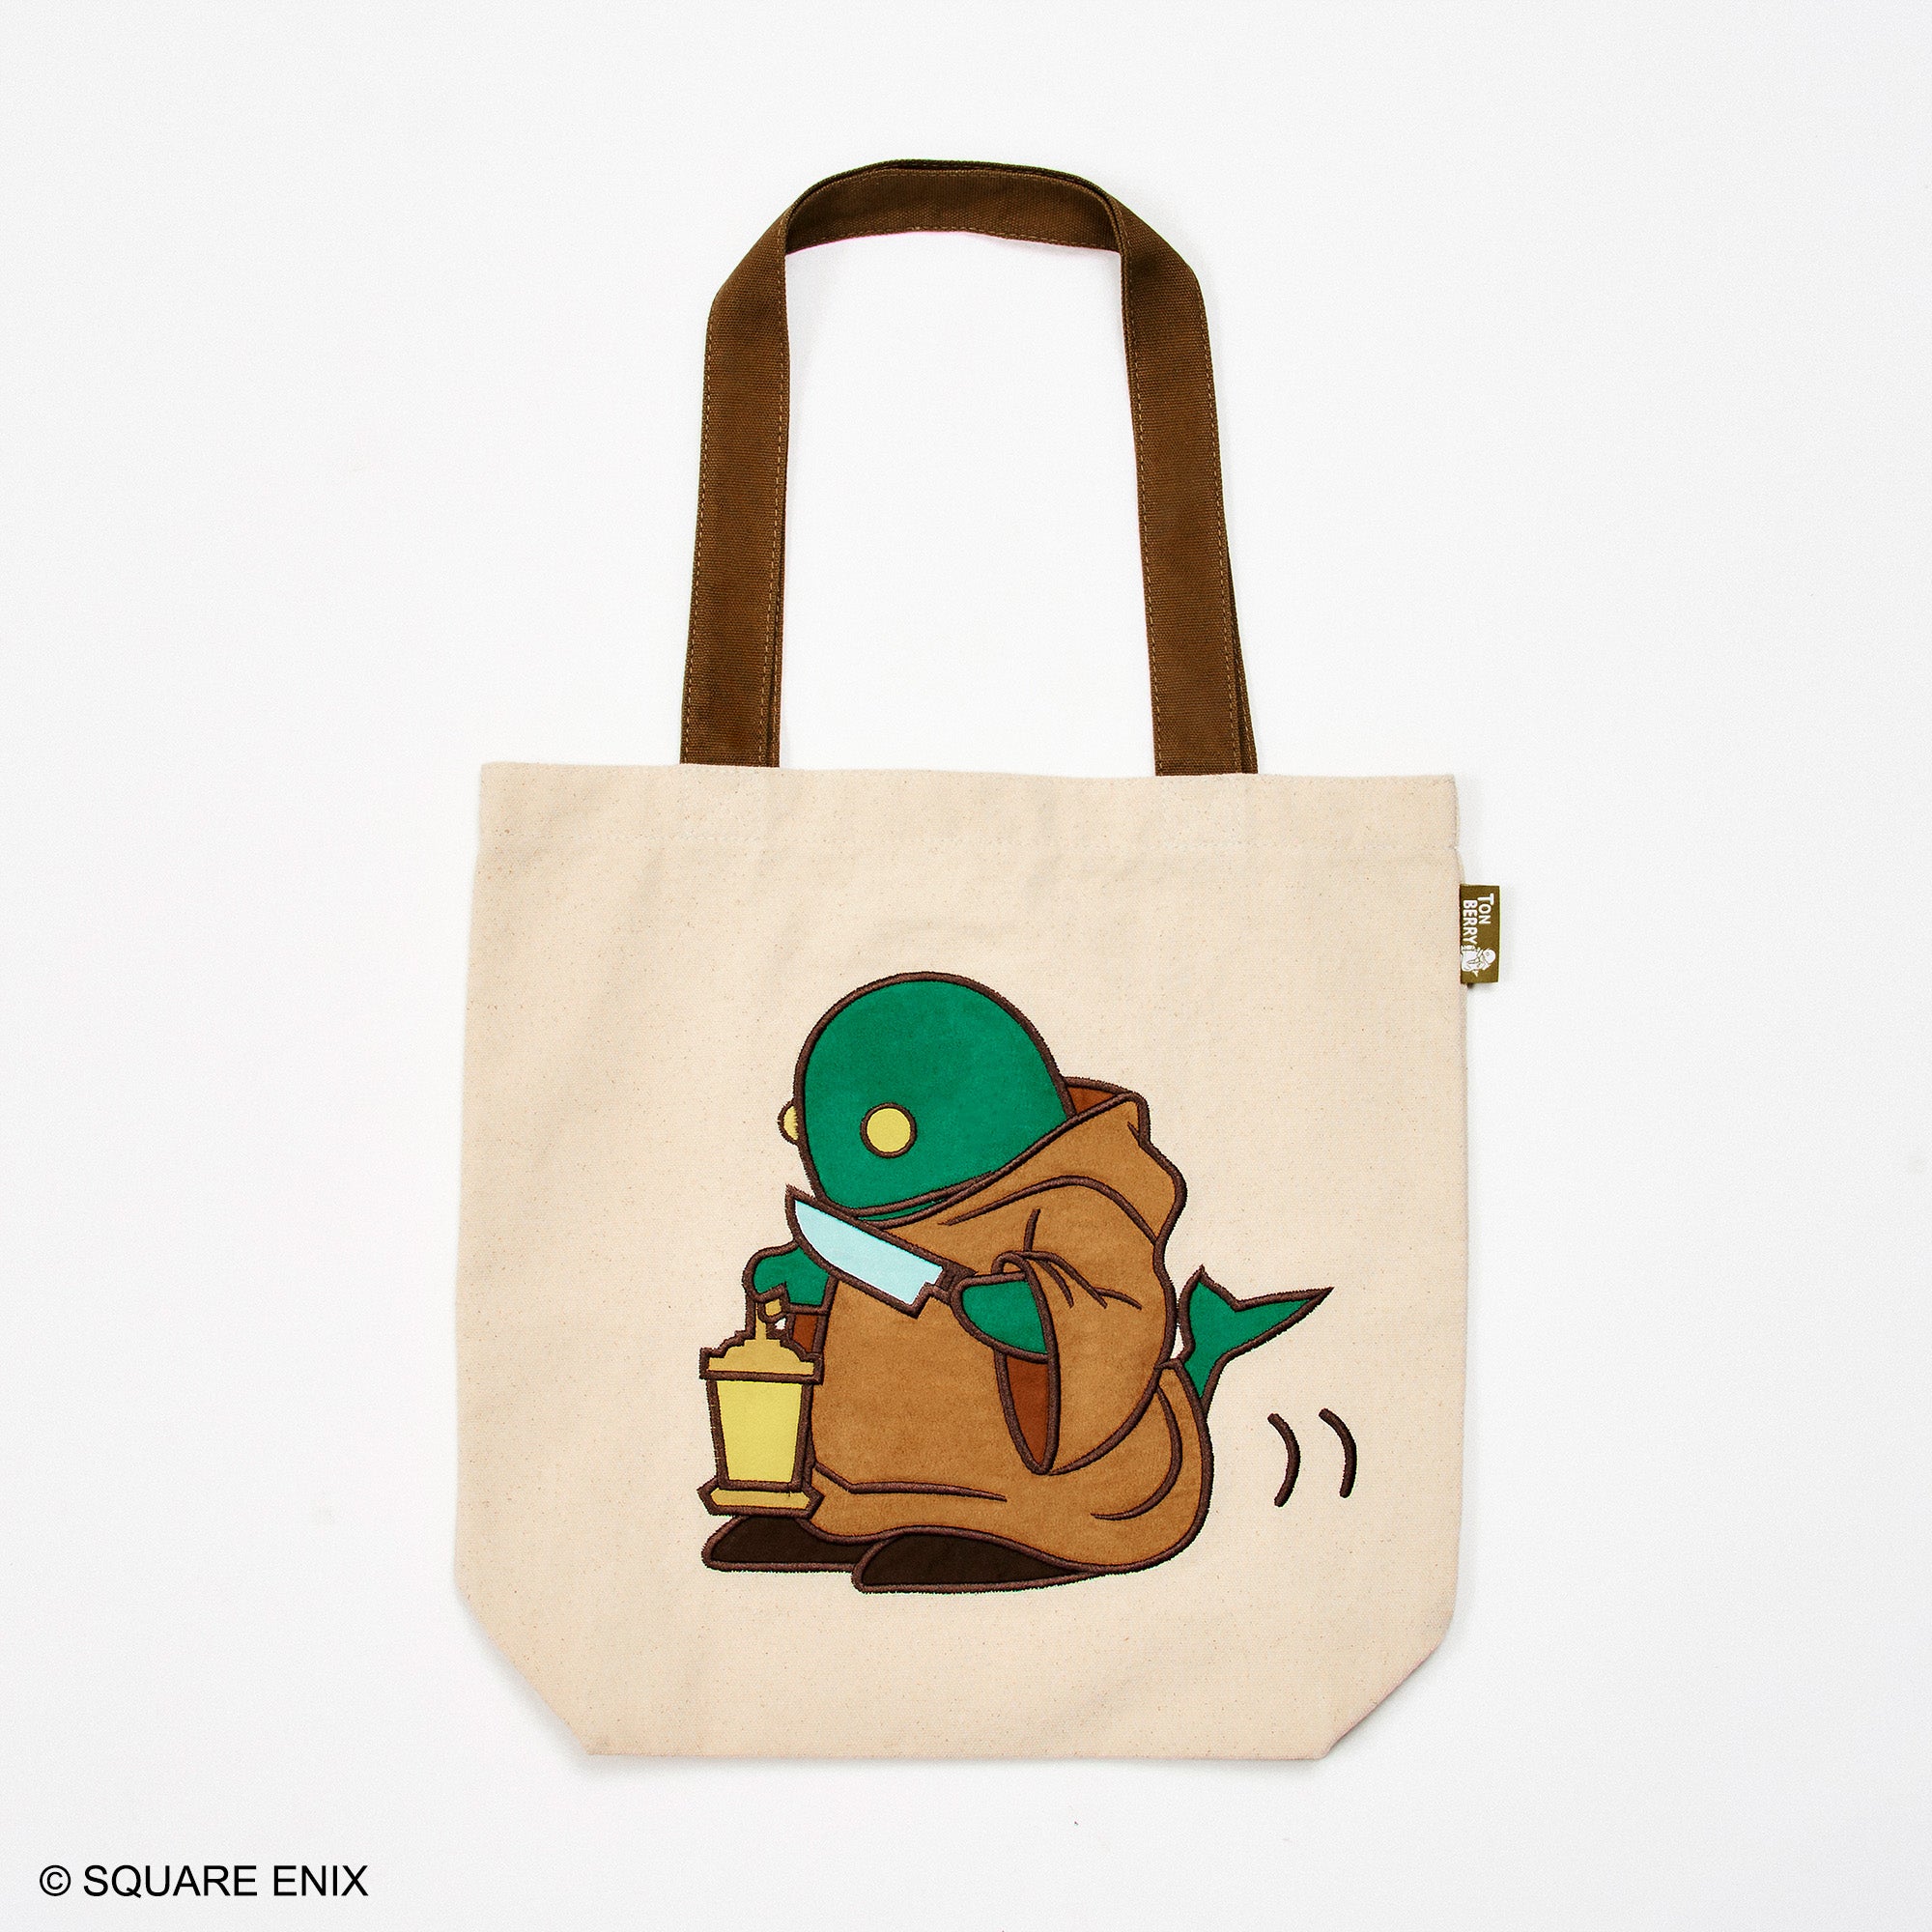 FINAL FANTASY Series Character Tote TONBERRY